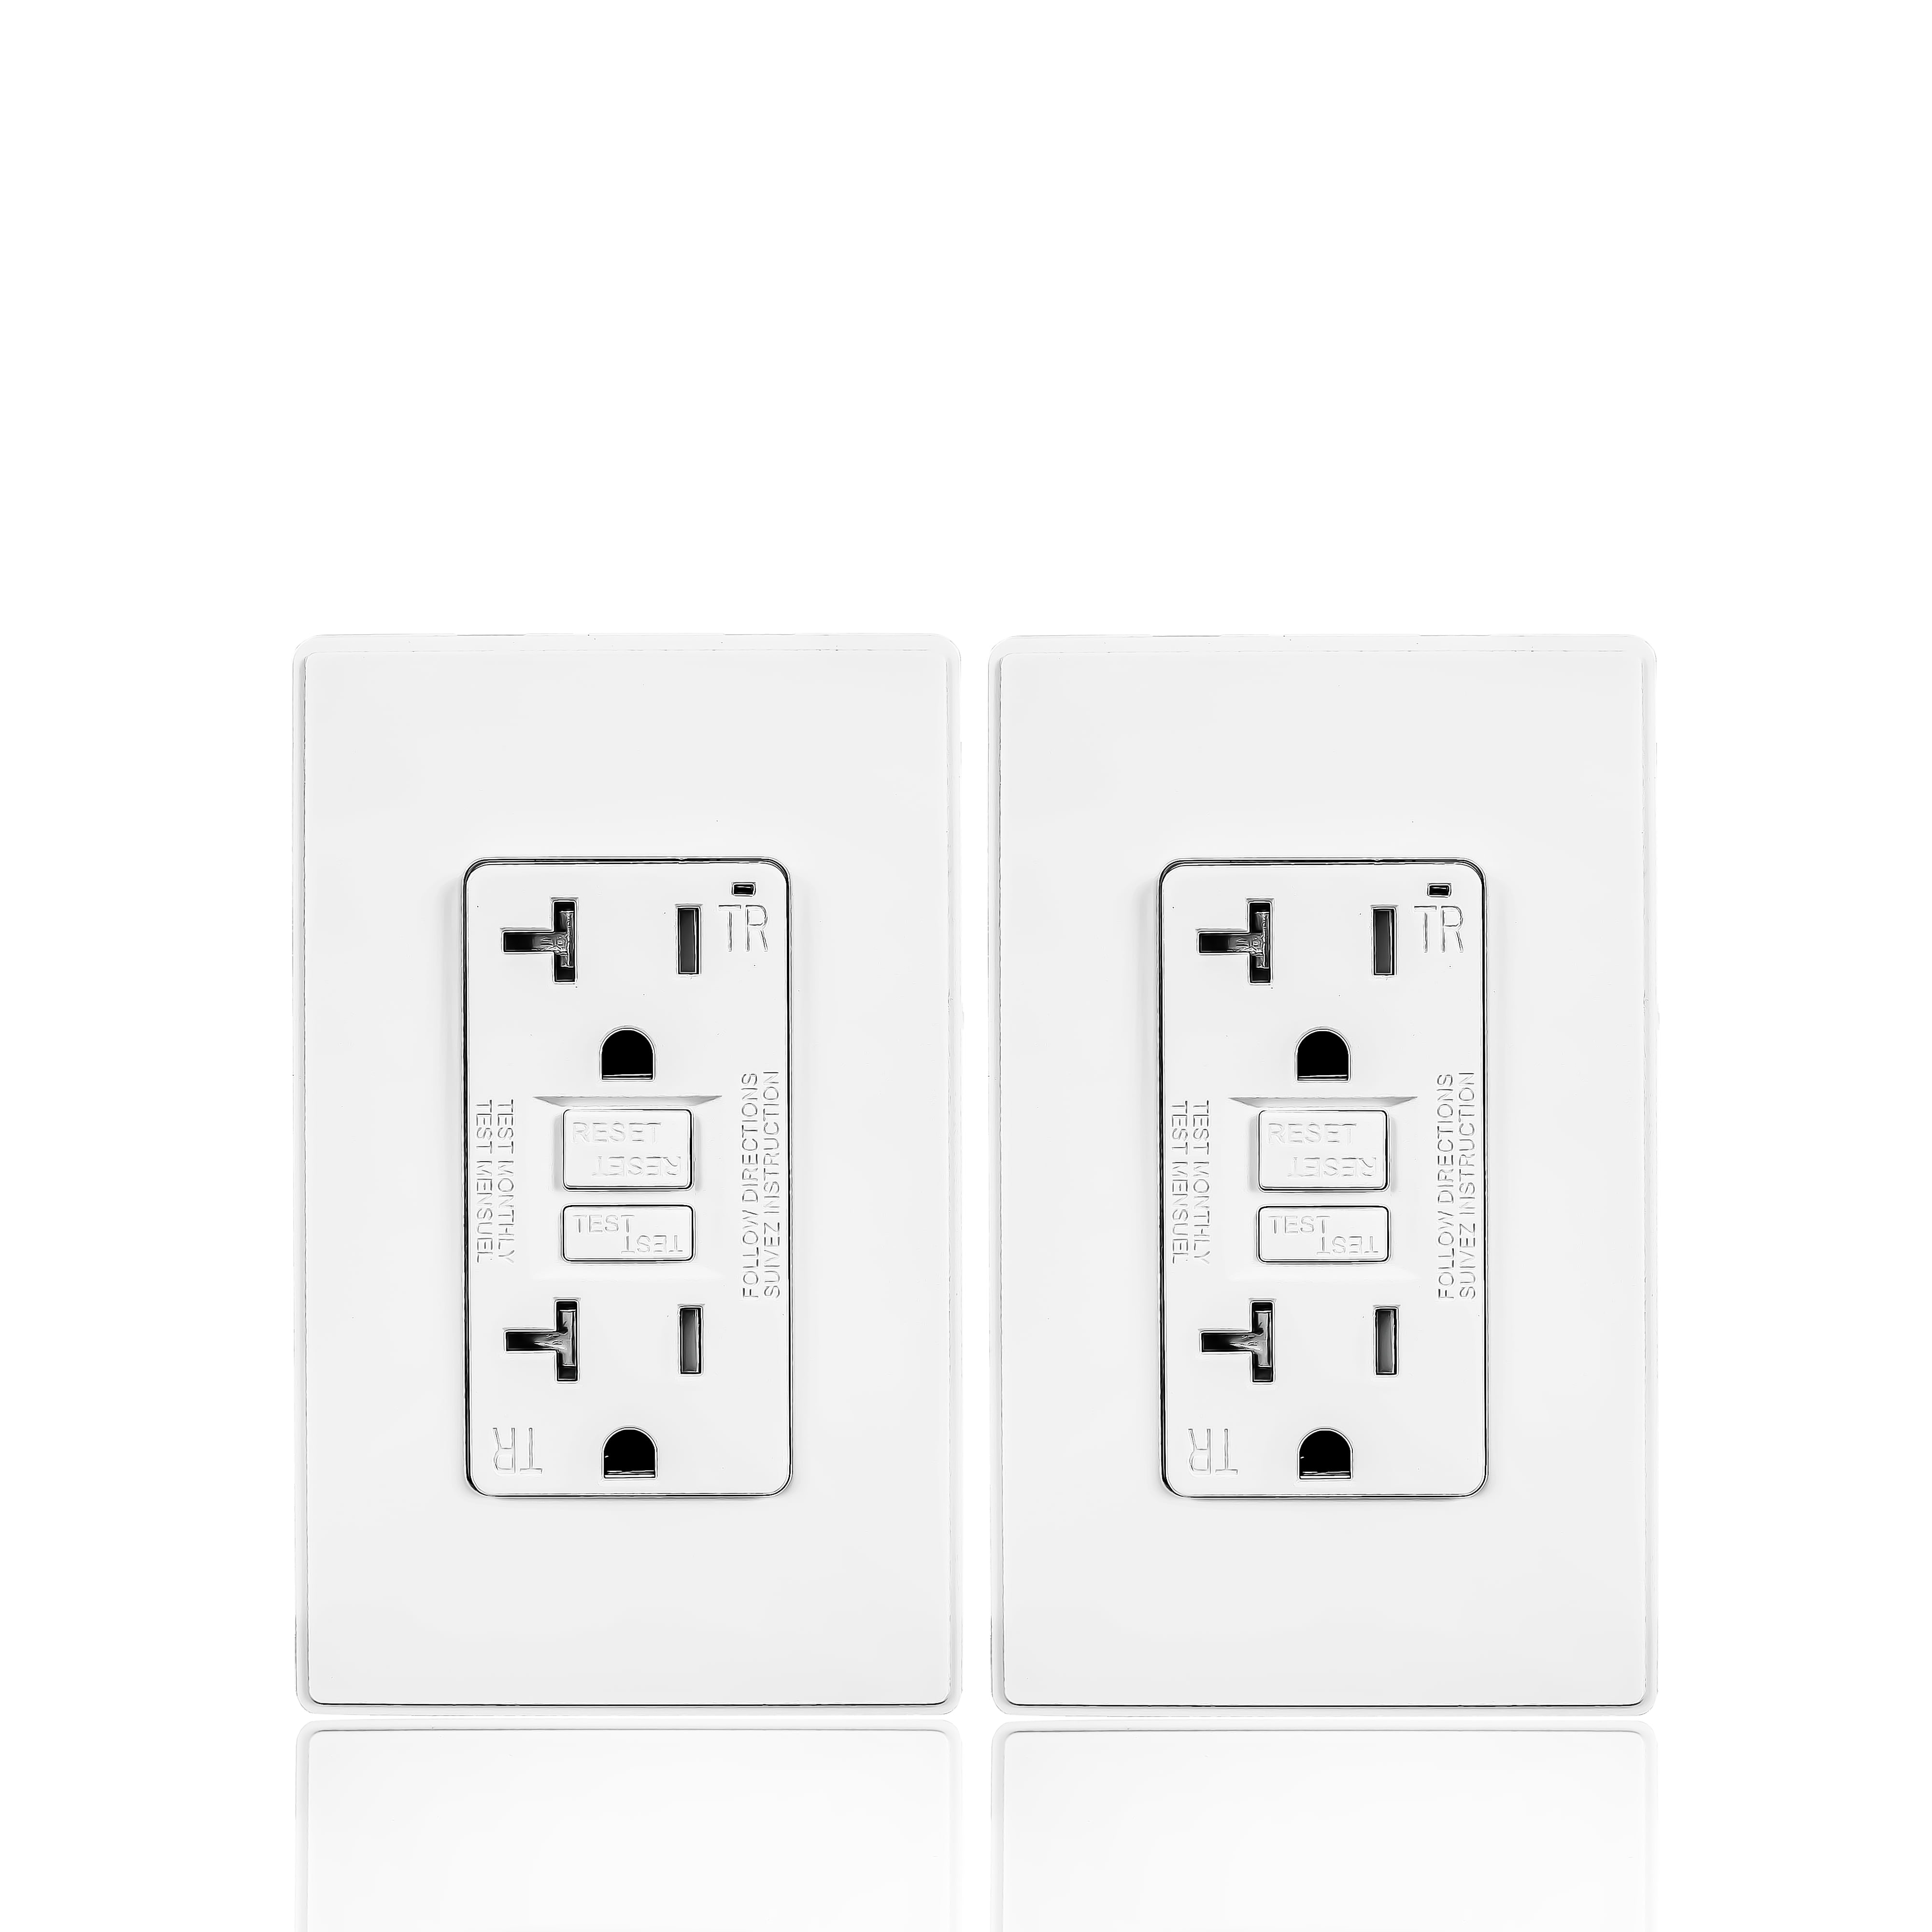 Ivory Gfi 20 Amp 20 Amp GFCI Receptacle Outlet w/ LED & Wallplate UL 10PACK 